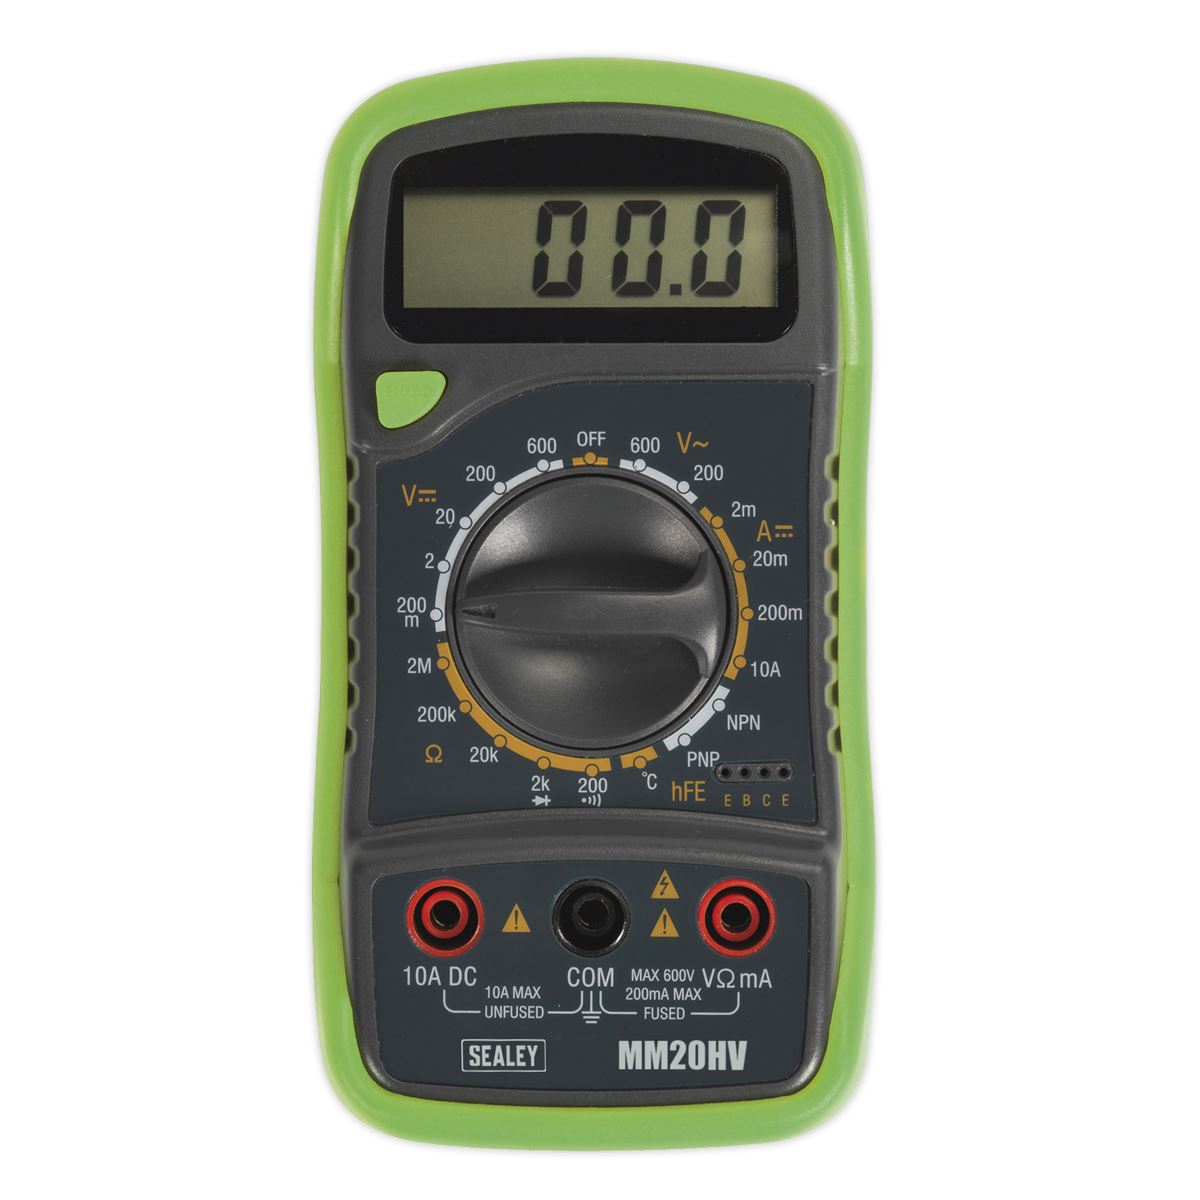 Sealey 8 Function Digital Multimeter with Thermocouple HV AC DC Current